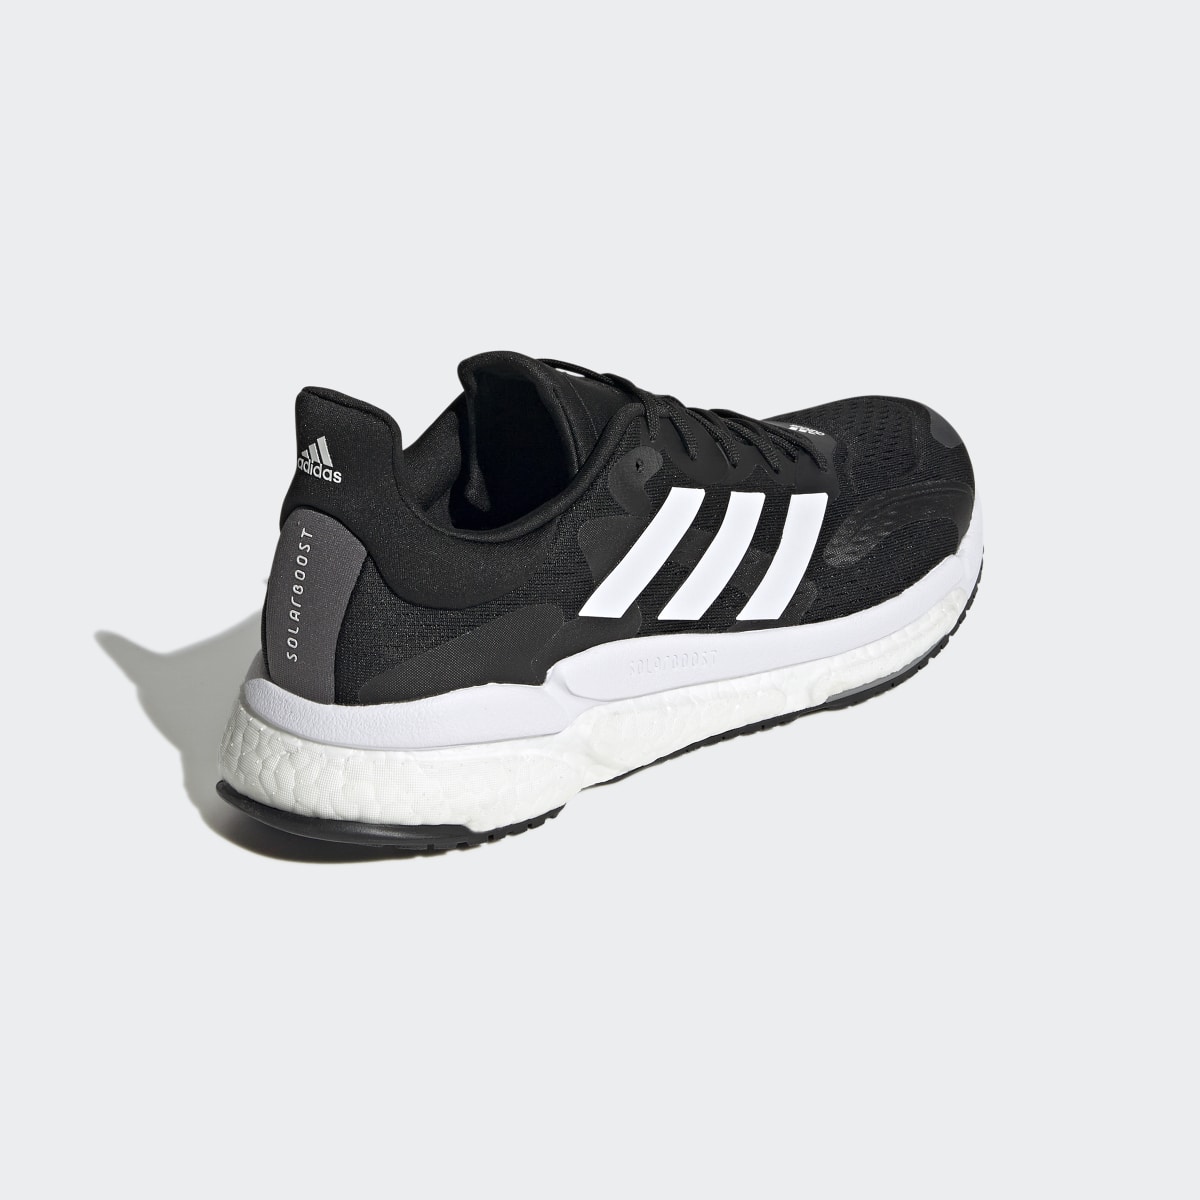 Adidas Solarboost 4 Shoes. 9